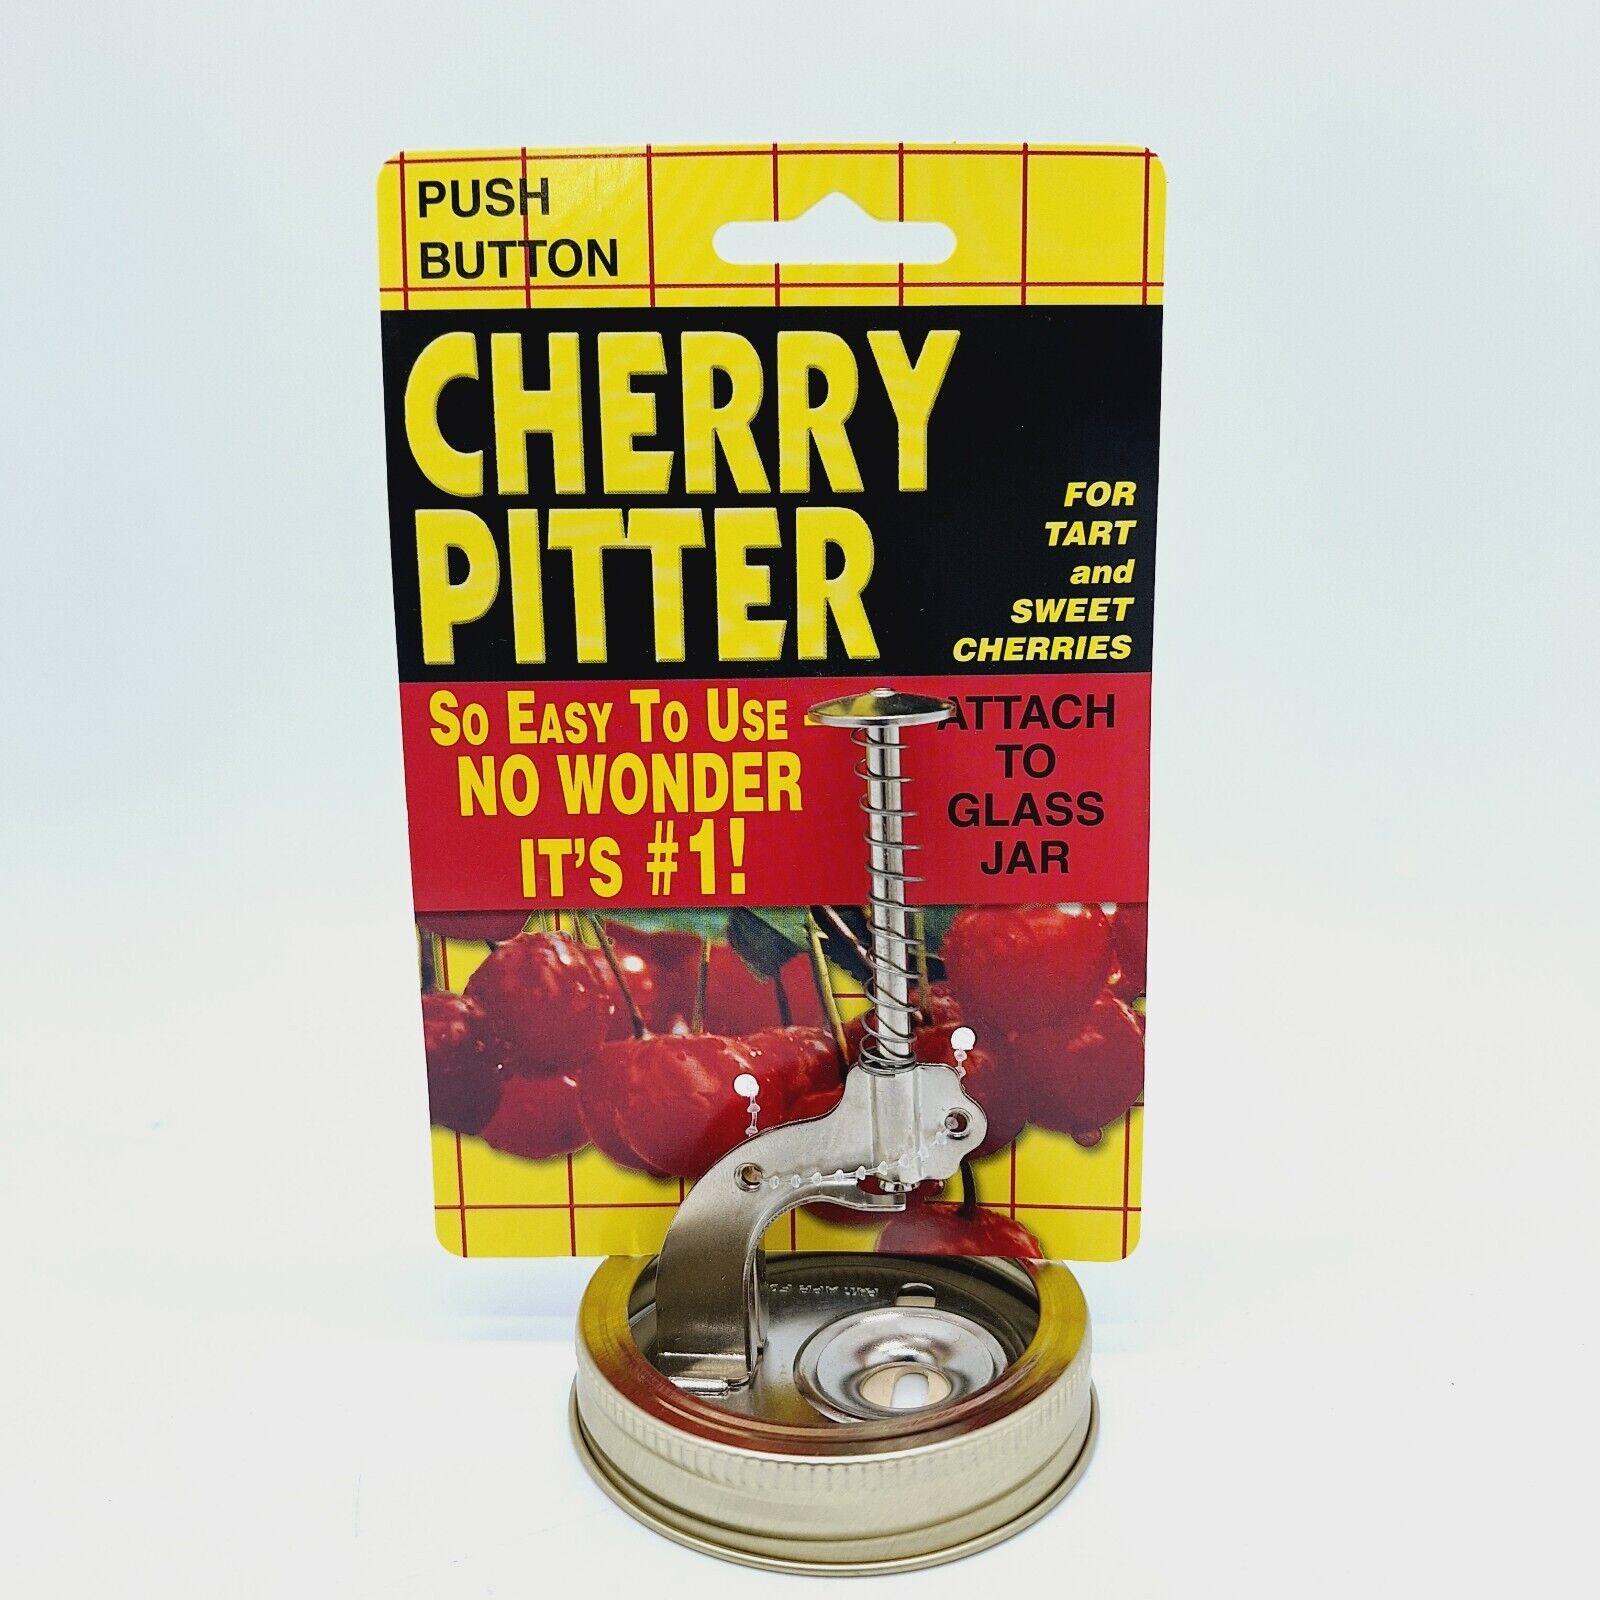 New Push Button Cherry Pitter Attach to Glass Screw On Canning Jar Cherries